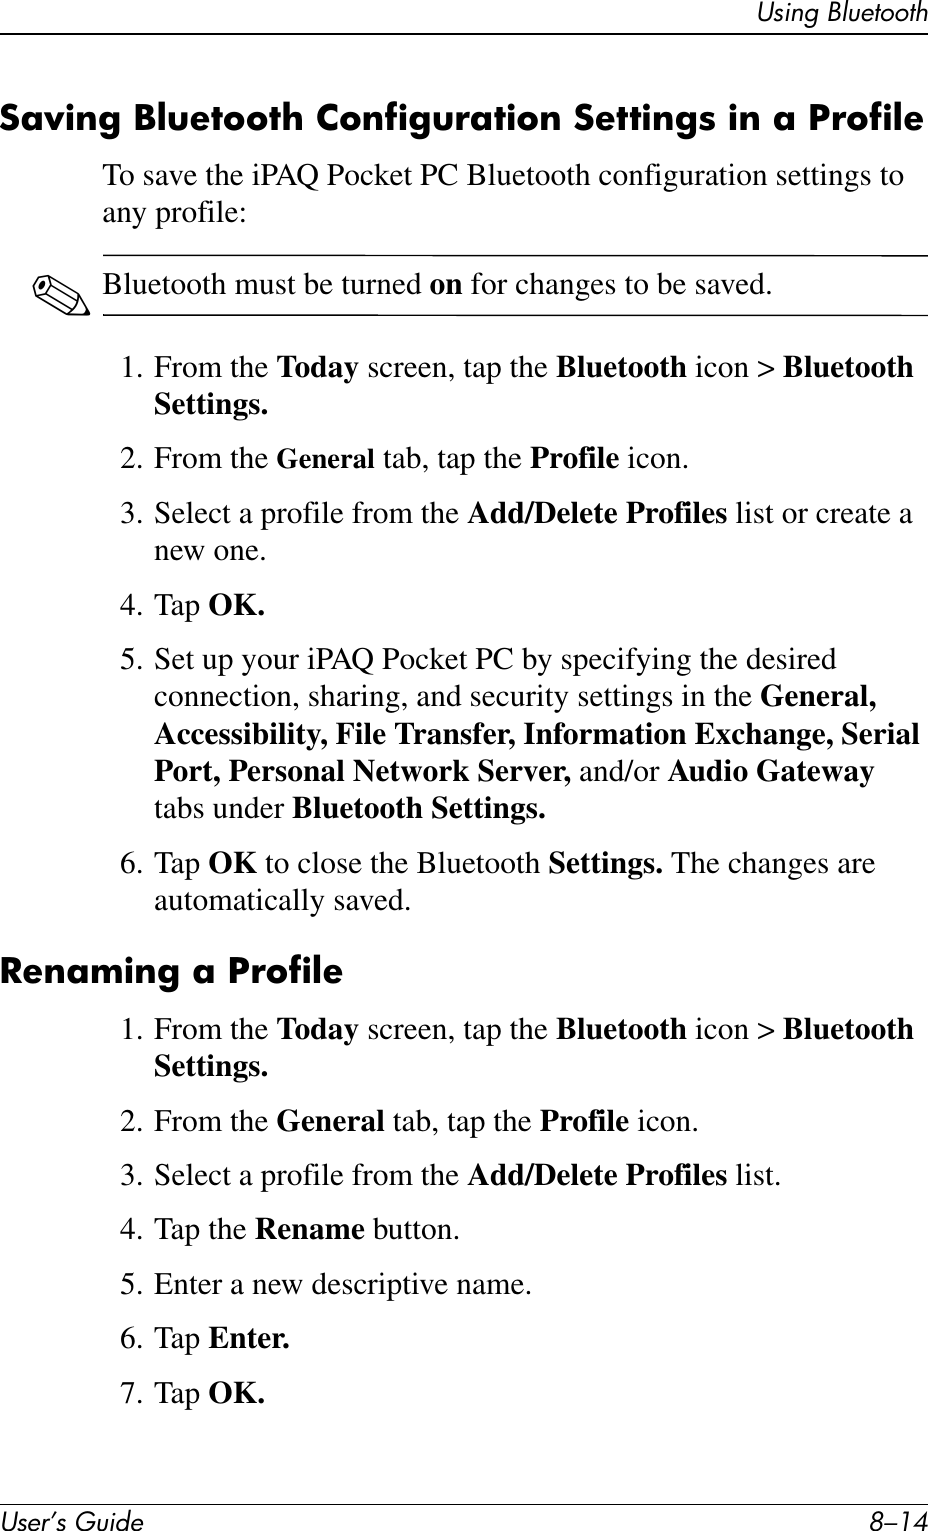 User’s Guide 8–14Using BluetoothSaving Bluetooth Configuration Settings in a ProfileTo save the iPAQ Pocket PC Bluetooth configuration settings to any profile:✎Bluetooth must be turned on for changes to be saved.1. From the Today screen, tap the Bluetooth icon &gt; Bluetooth Settings.2. From the General tab, tap the Profile icon.3. Select a profile from the Add/Delete Profiles list or create a new one.4. Tap OK.5. Set up your iPAQ Pocket PC by specifying the desired connection, sharing, and security settings in the General, Accessibility, File Transfer, Information Exchange, Serial Port, Personal Network Server, and/or Audio Gateway tabs under Bluetooth Settings.6. Tap OK to close the Bluetooth Settings. The changes are automatically saved.Renaming a Profile1. From the Today screen, tap the Bluetooth icon &gt; Bluetooth Settings.2. From the General tab, tap the Profile icon.3. Select a profile from the Add/Delete Profiles list.4. Tap the Rename button.5. Enter a new descriptive name.6. Tap Enter.7. Tap OK.